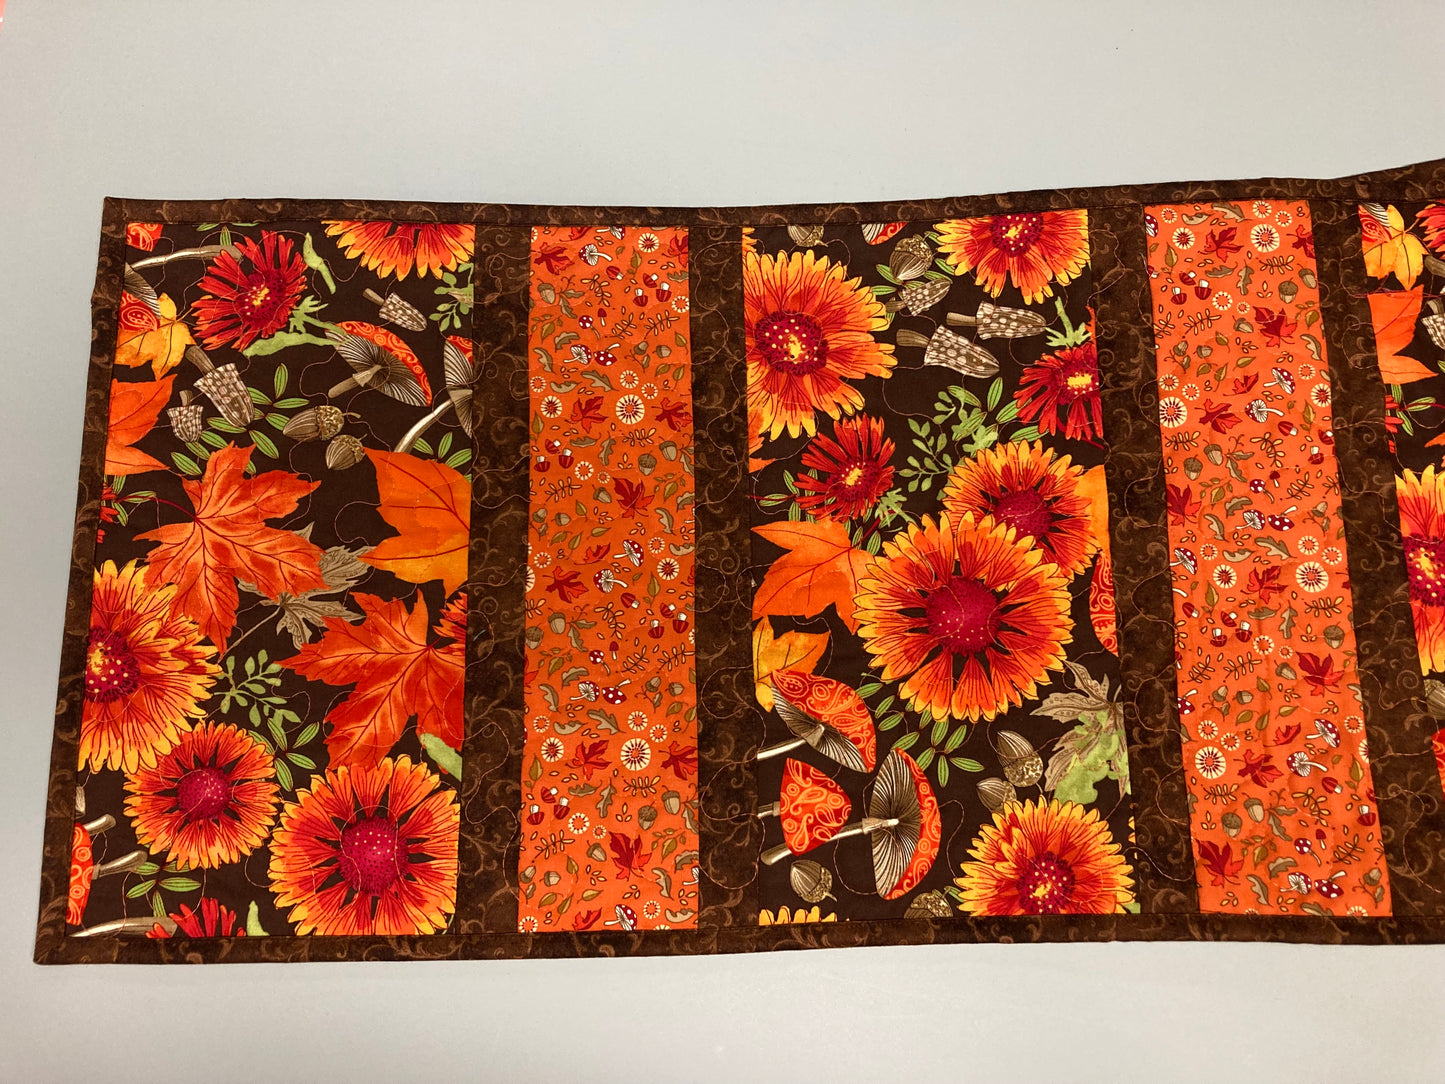 Fall Sunflowers Mushrooms and Acorns Quilted Table Runner, 13x62" Reversible Leaves, Woodland Forest Orange Red Green Dining Coffee Table